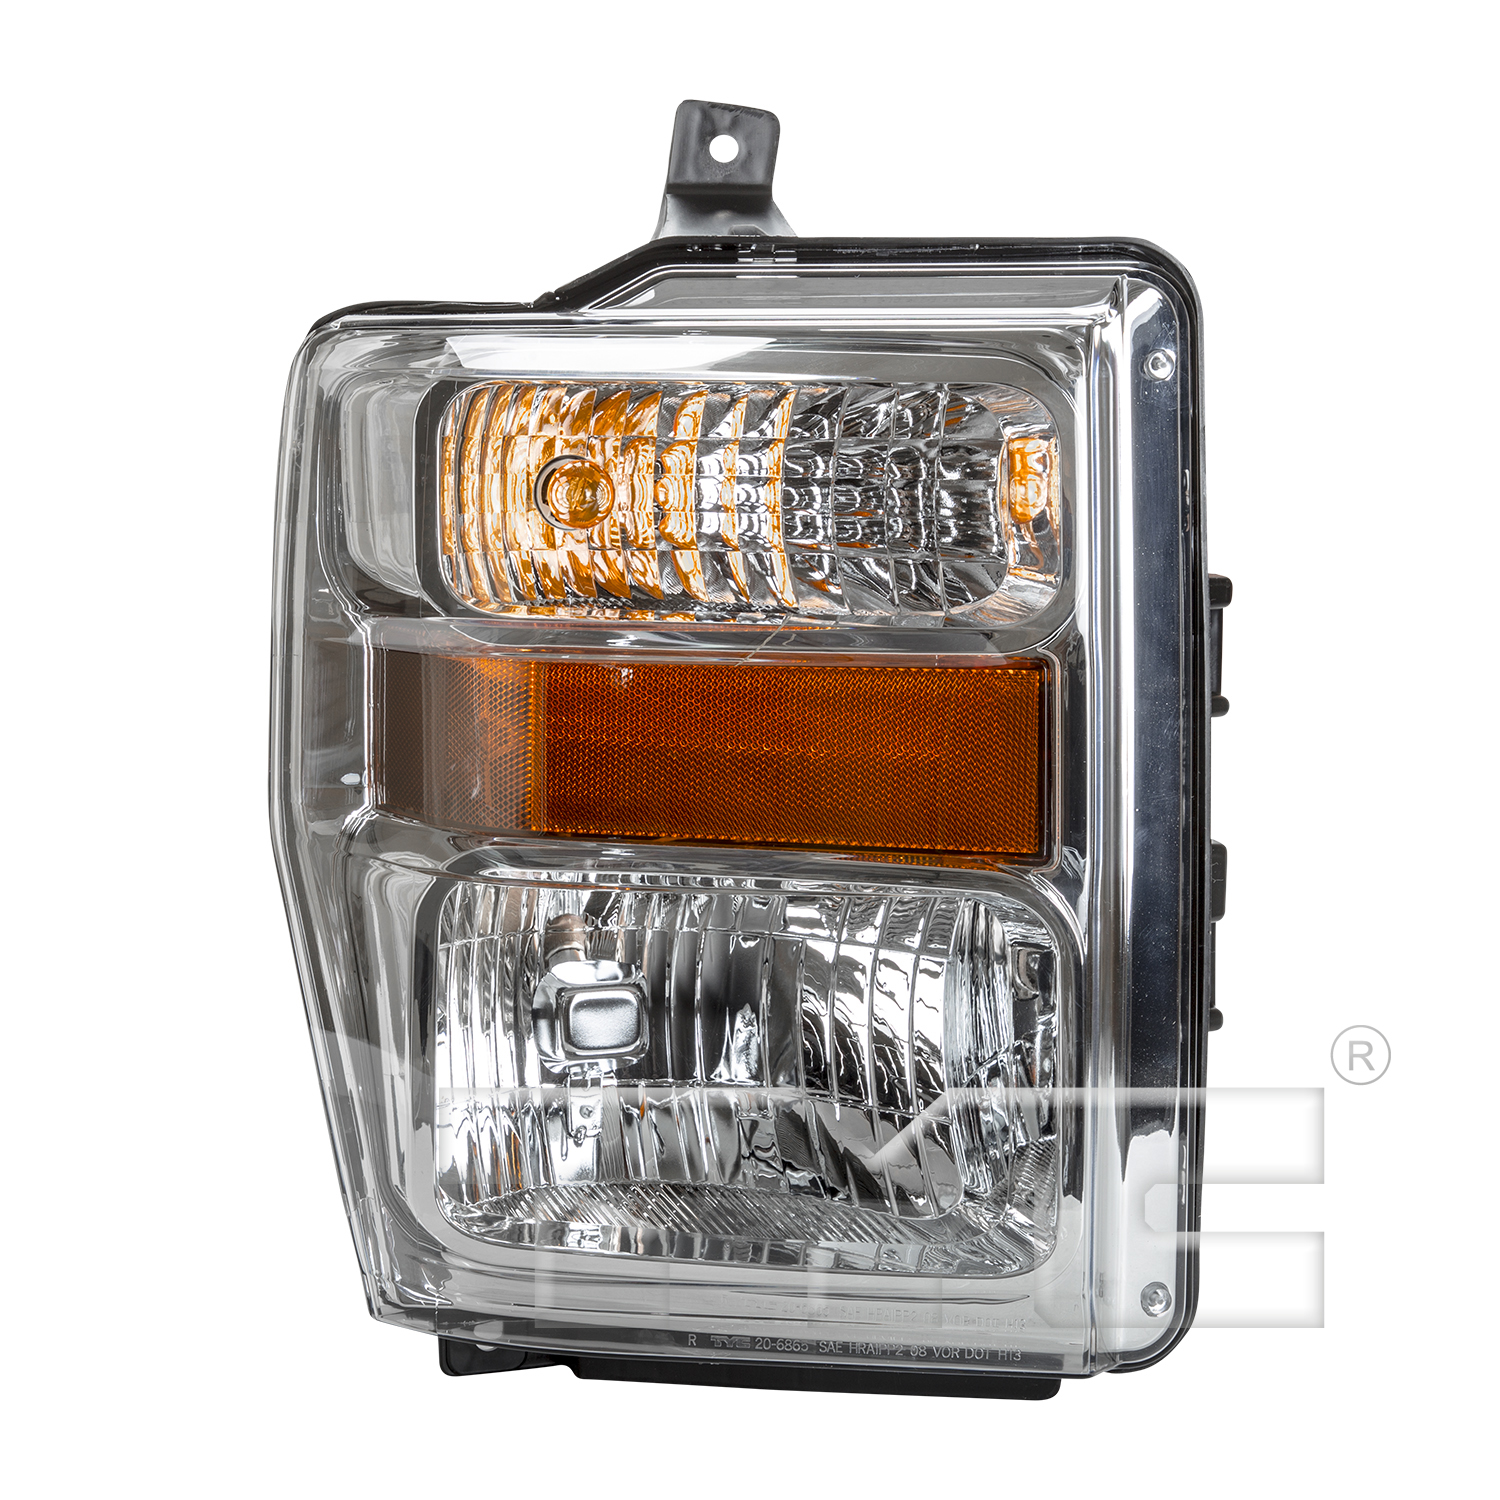 Aftermarket HEADLIGHTS for FORD - F-350 SUPER DUTY, F-350 SUPER DUTY,08-10,RT Headlamp assy composite